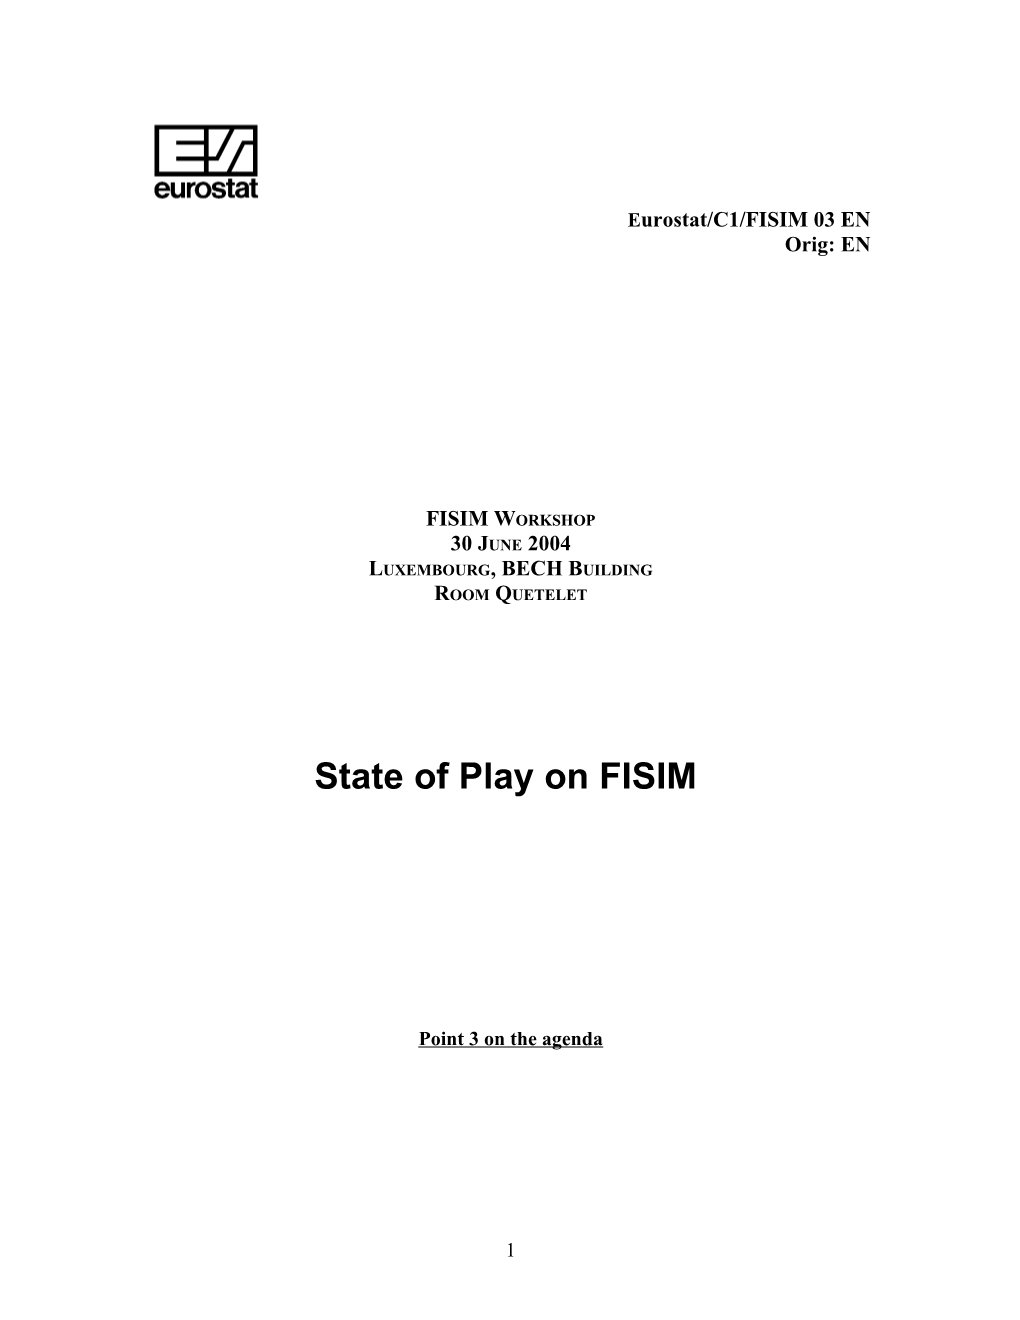 Results of Implementing the FISIM Calculations by Member States